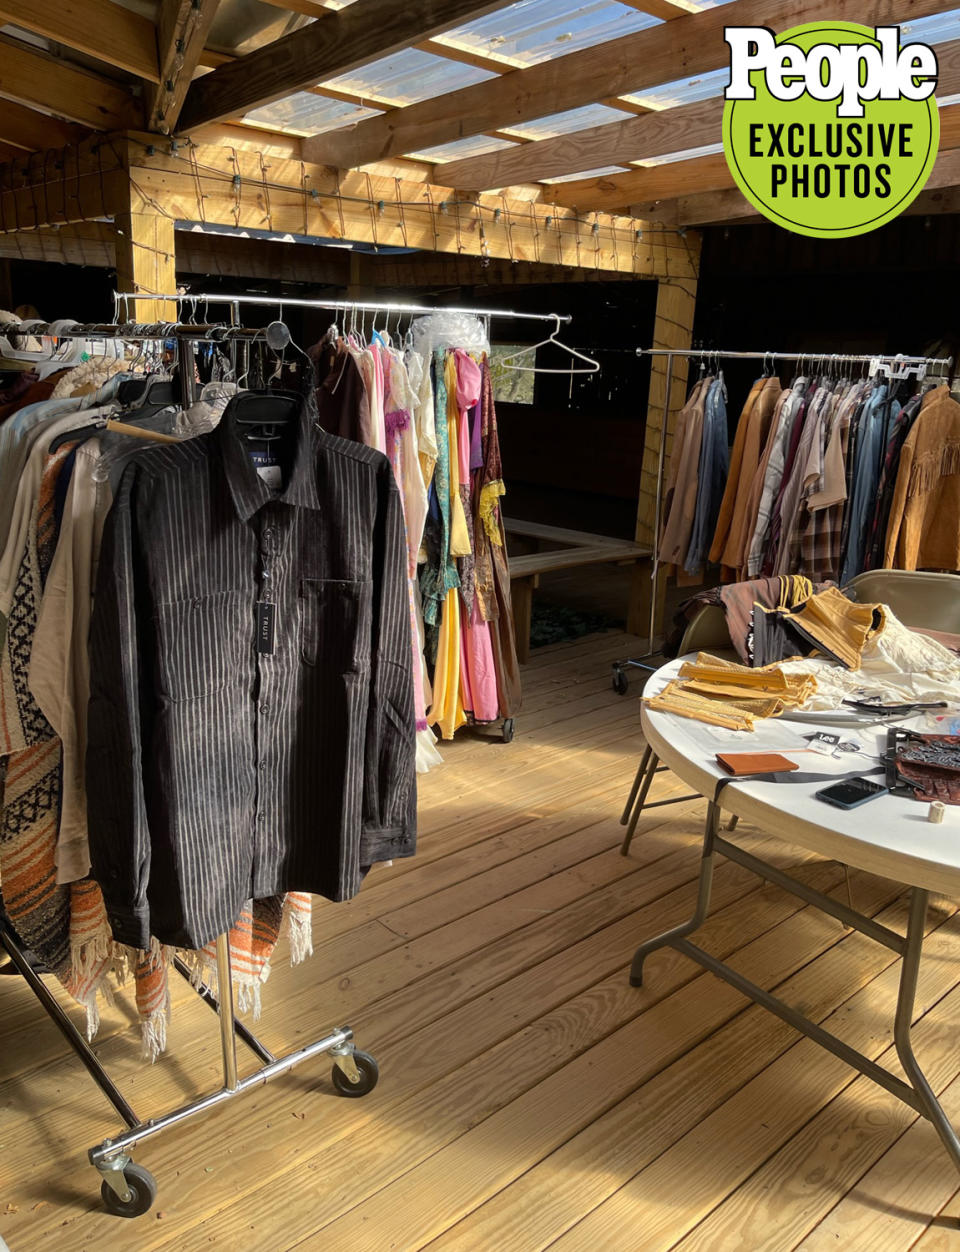 <p>Here's a look at the wardrobe for everyone on the shoot! I loved the old Western style.</p>